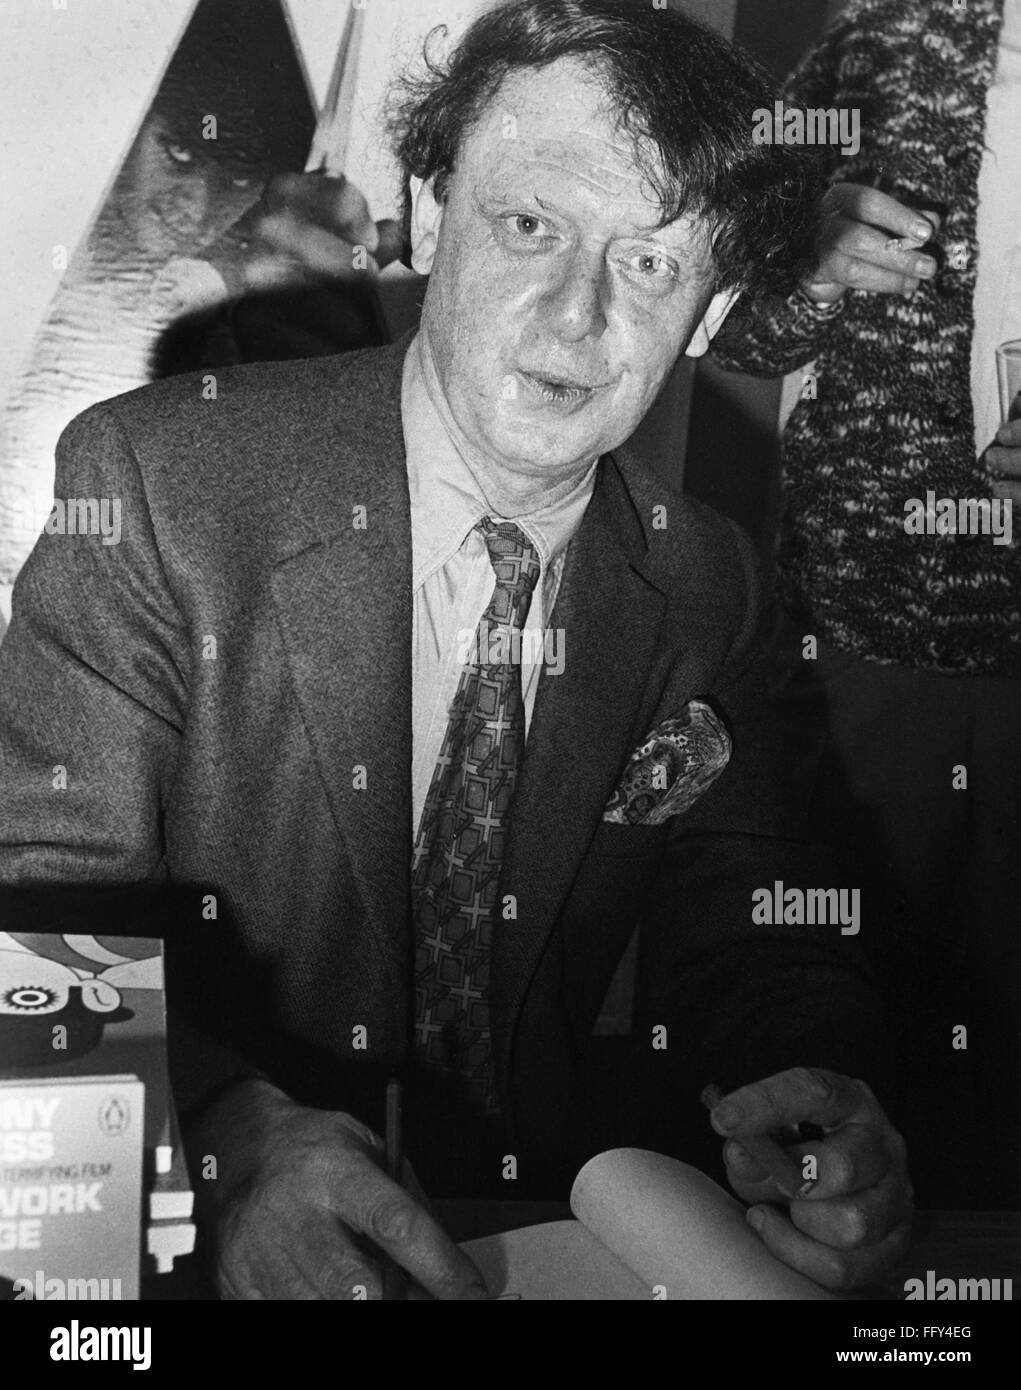 ANTHONY BURGESS (1917-1993). /nEnglish writer. Burgess signing copies of his book, 'A Clockwork Orange,' at the Cannes Film Festival where the film made by Stanley Kubrick was screened. Photograph, 16 May 1971. Stock Photo